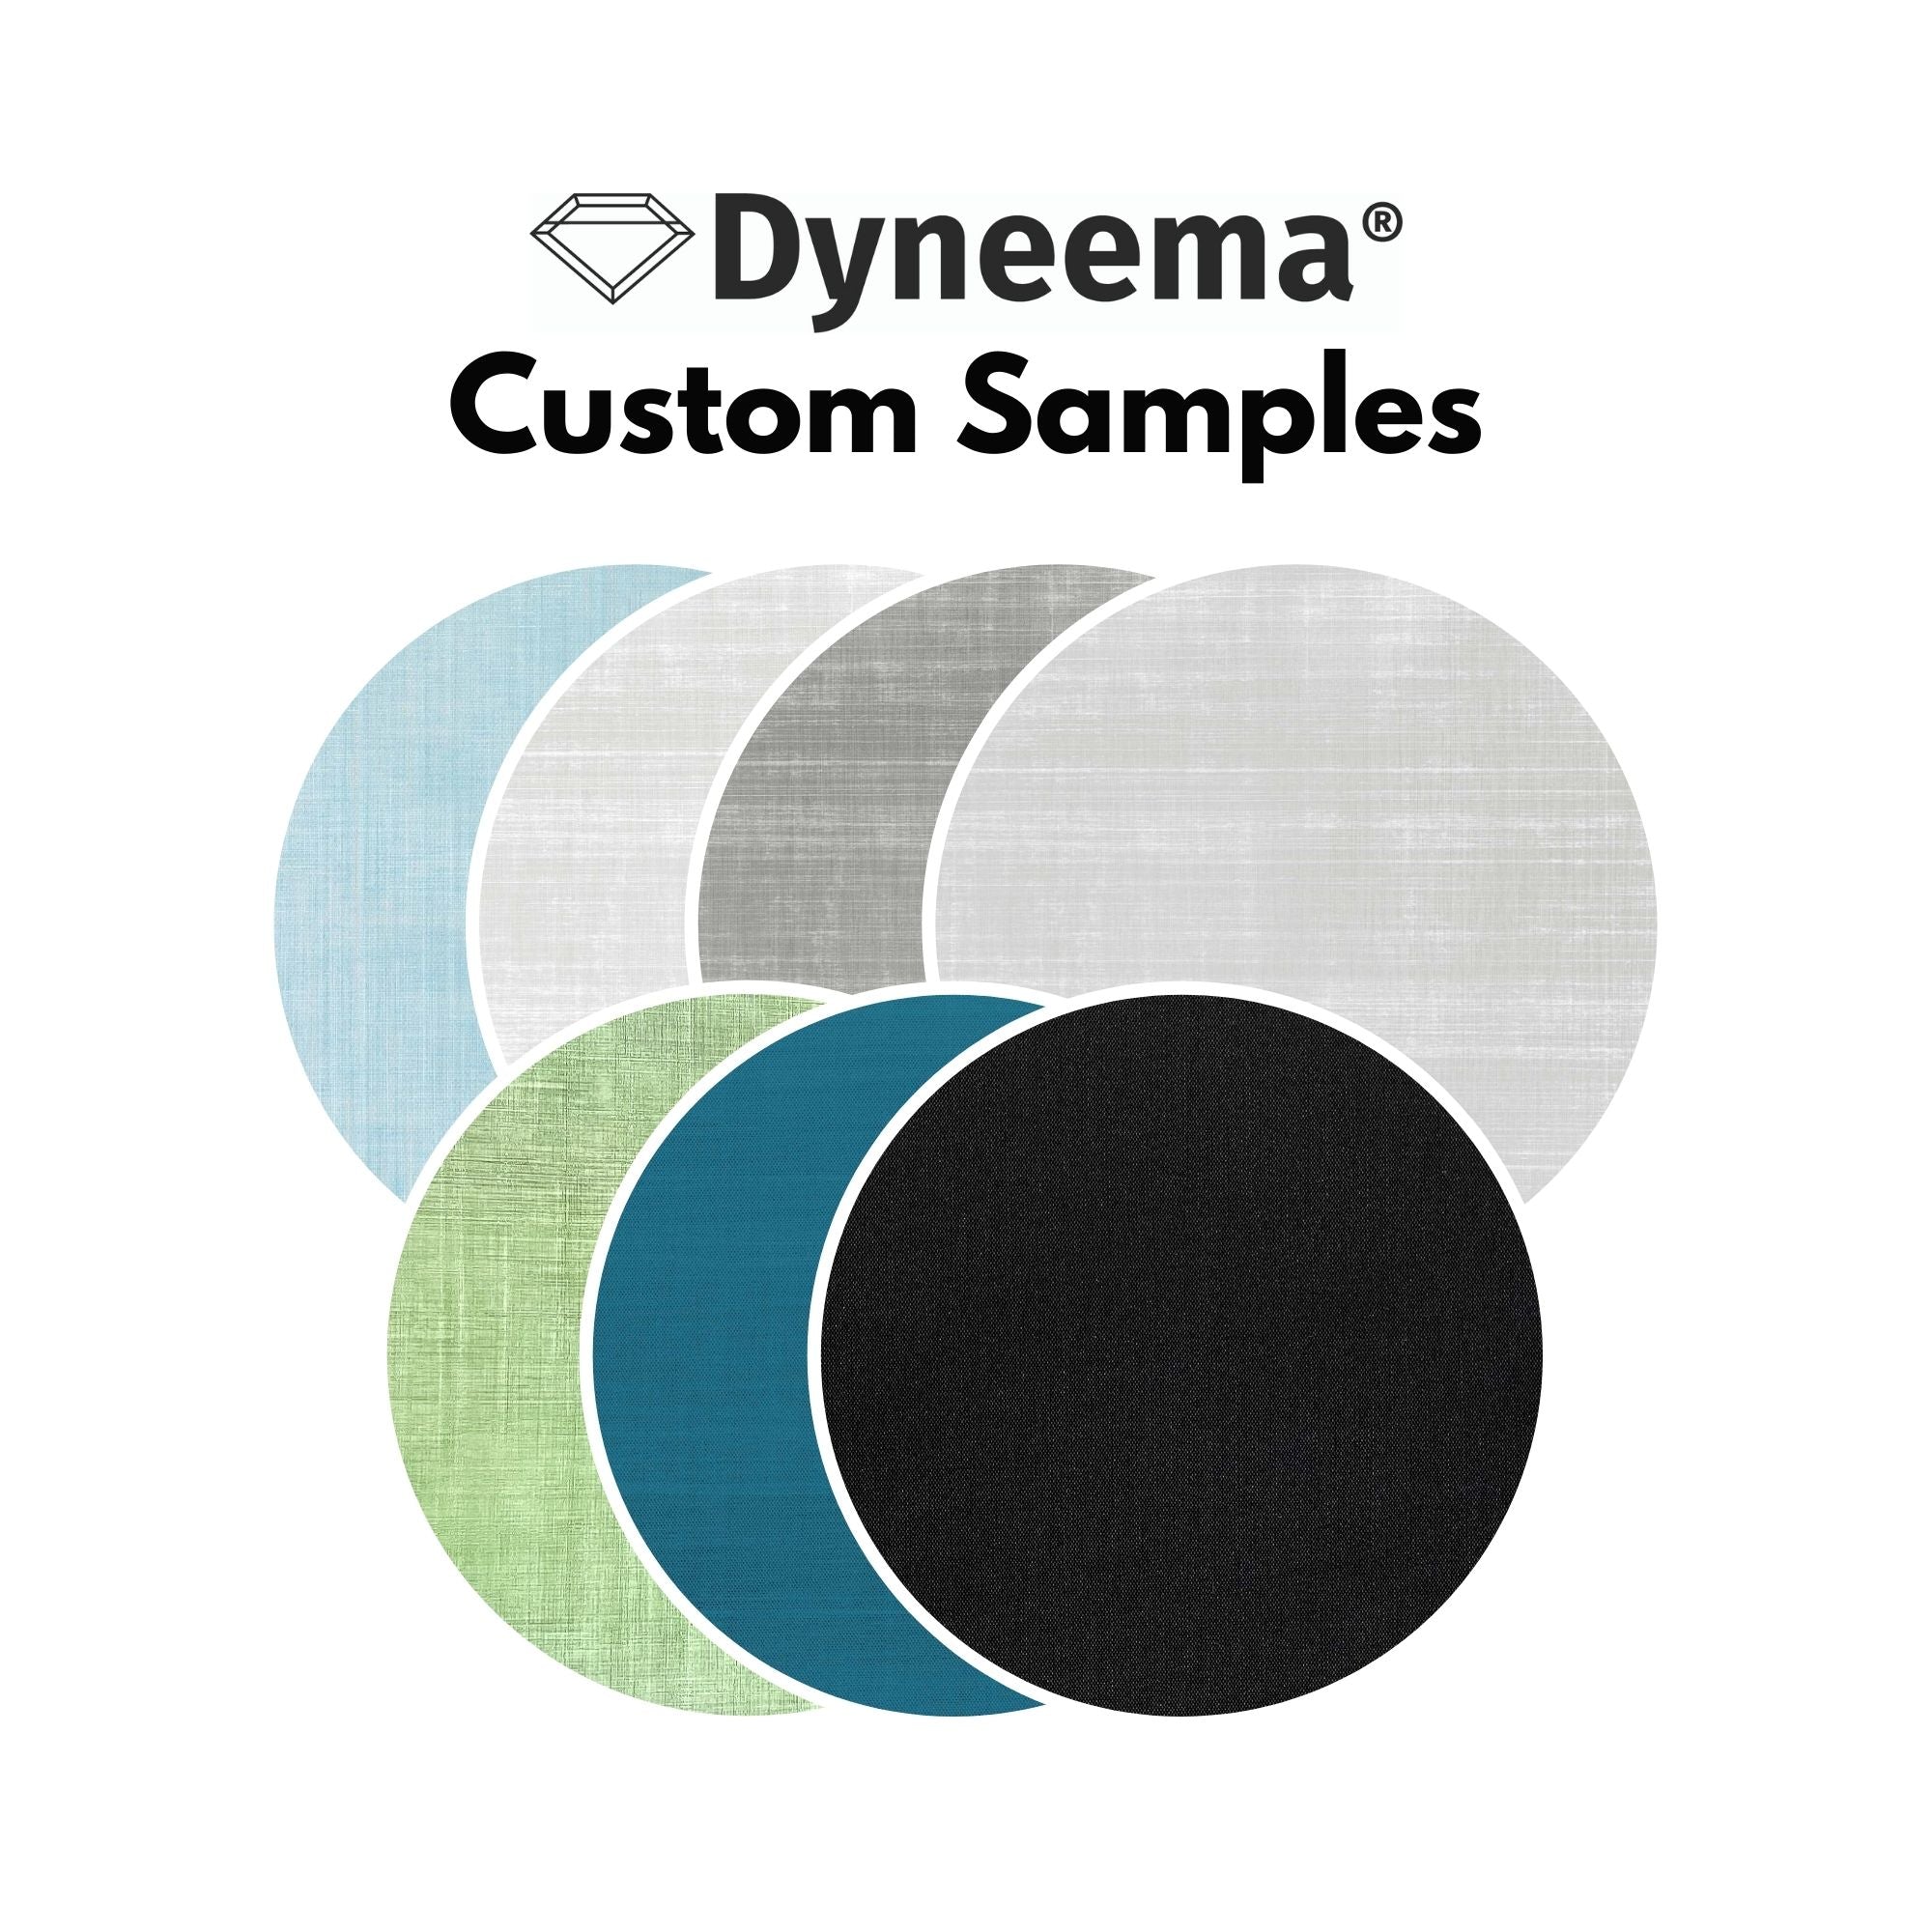 Dyneema® Composite Fabric | Samples - Ripstop by the Roll